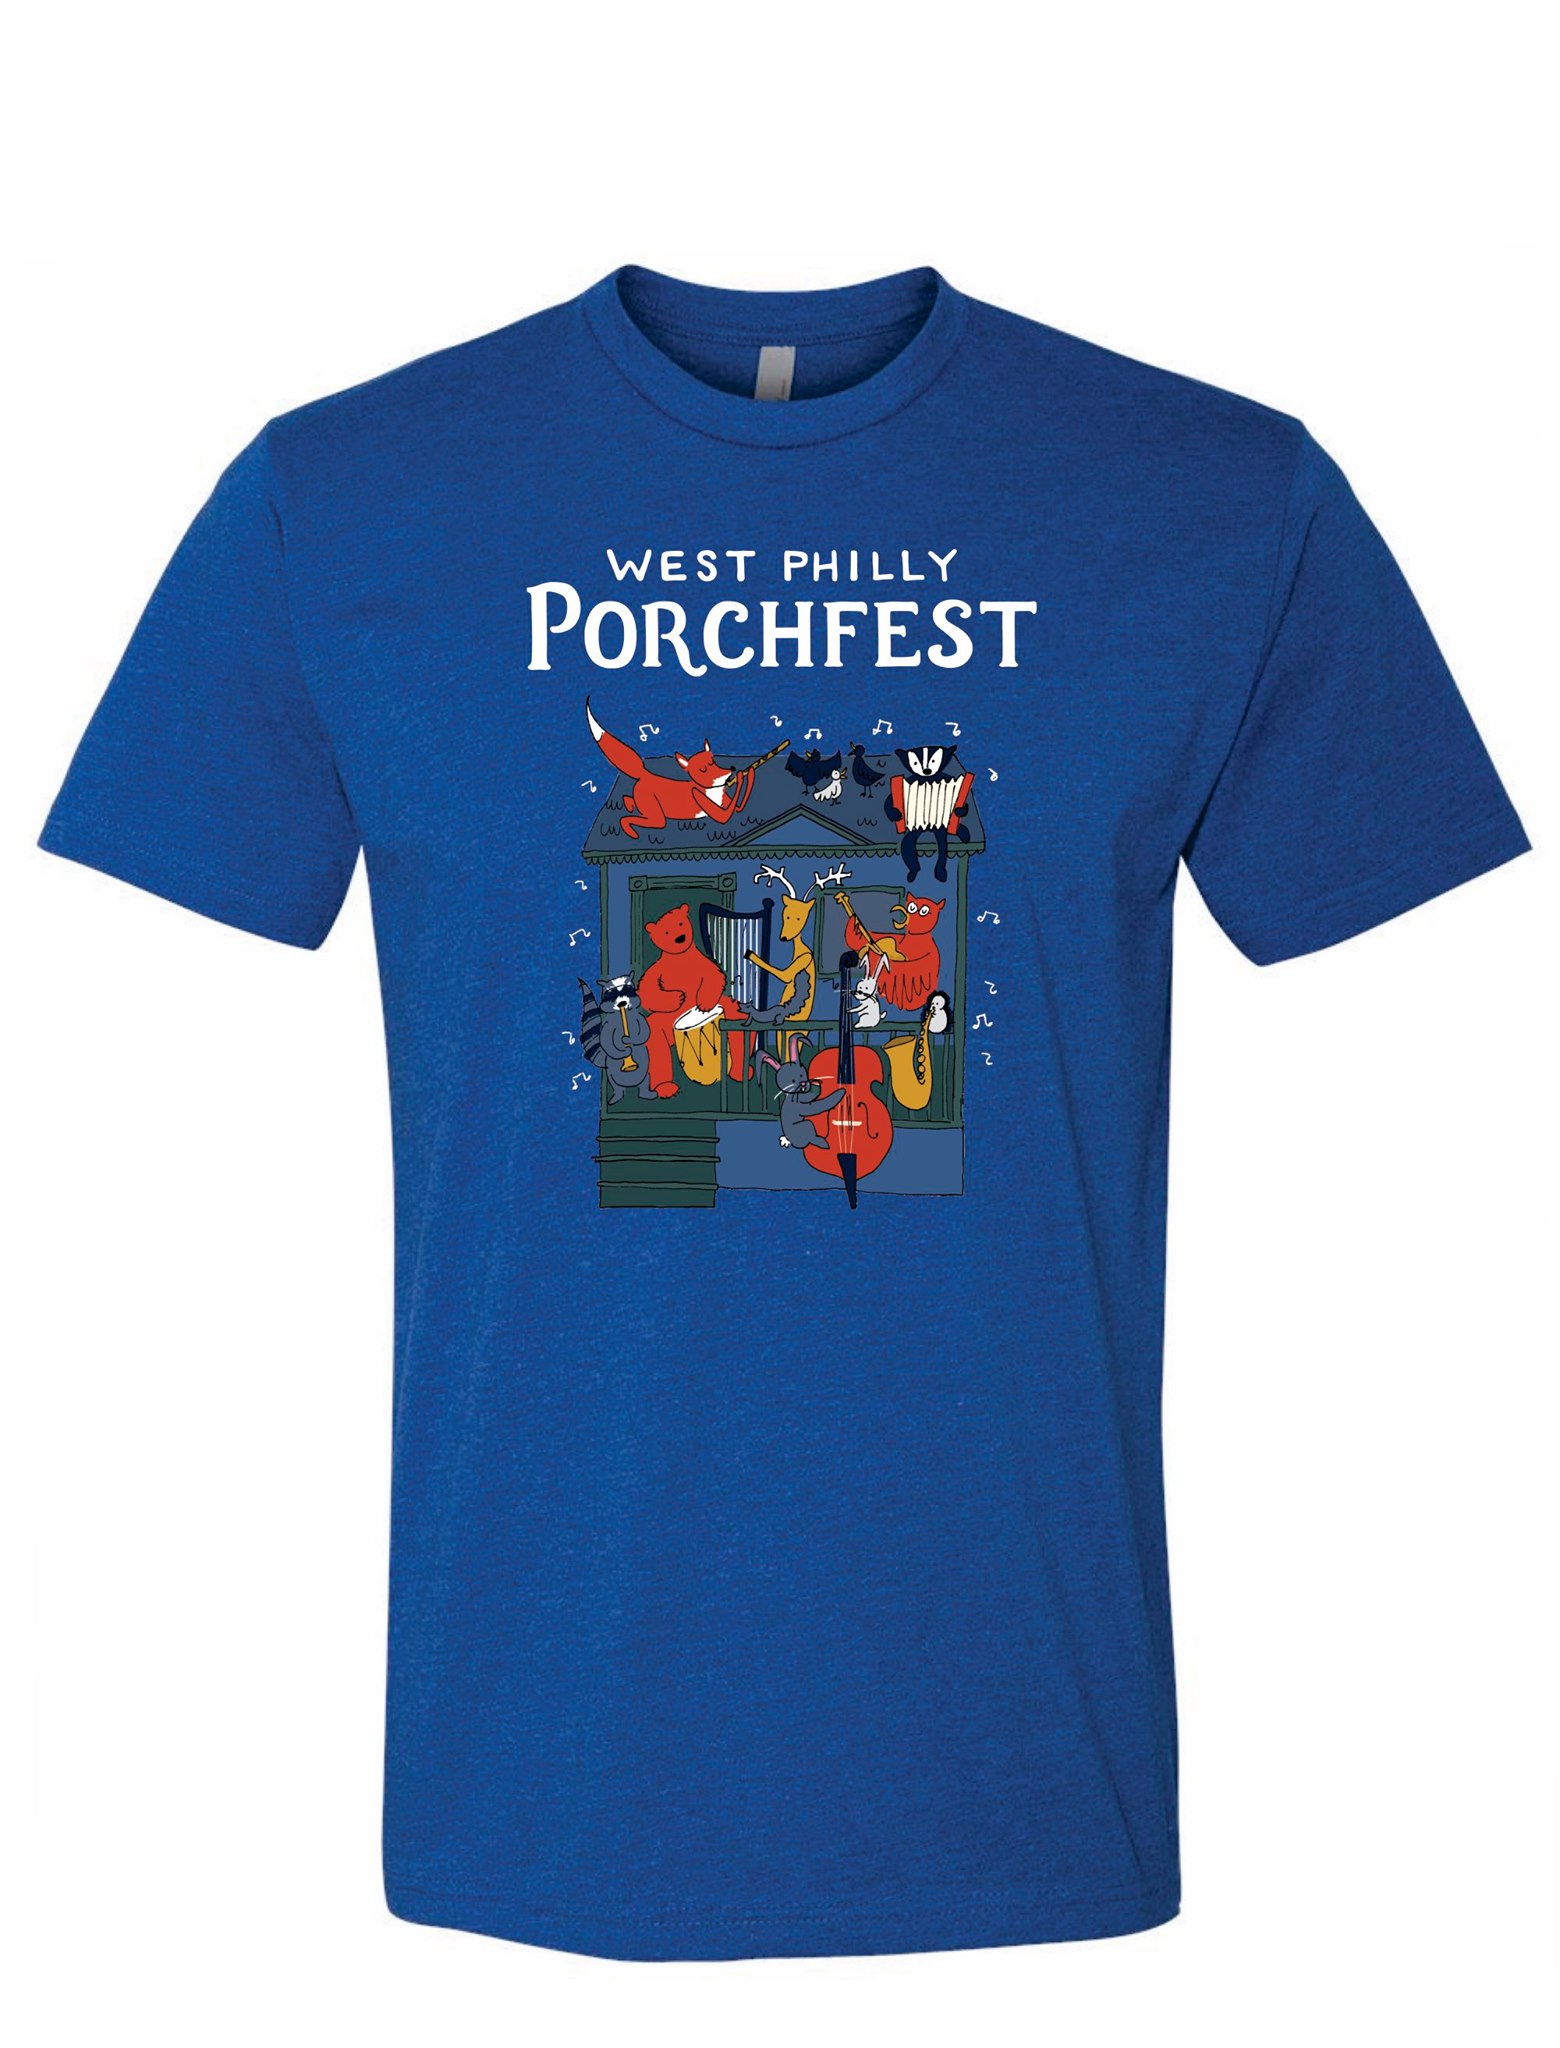 Mockup of the Porchfest t-shirt, which is a royal blue with an illustration of various animals playing instruments on the porch of a house.